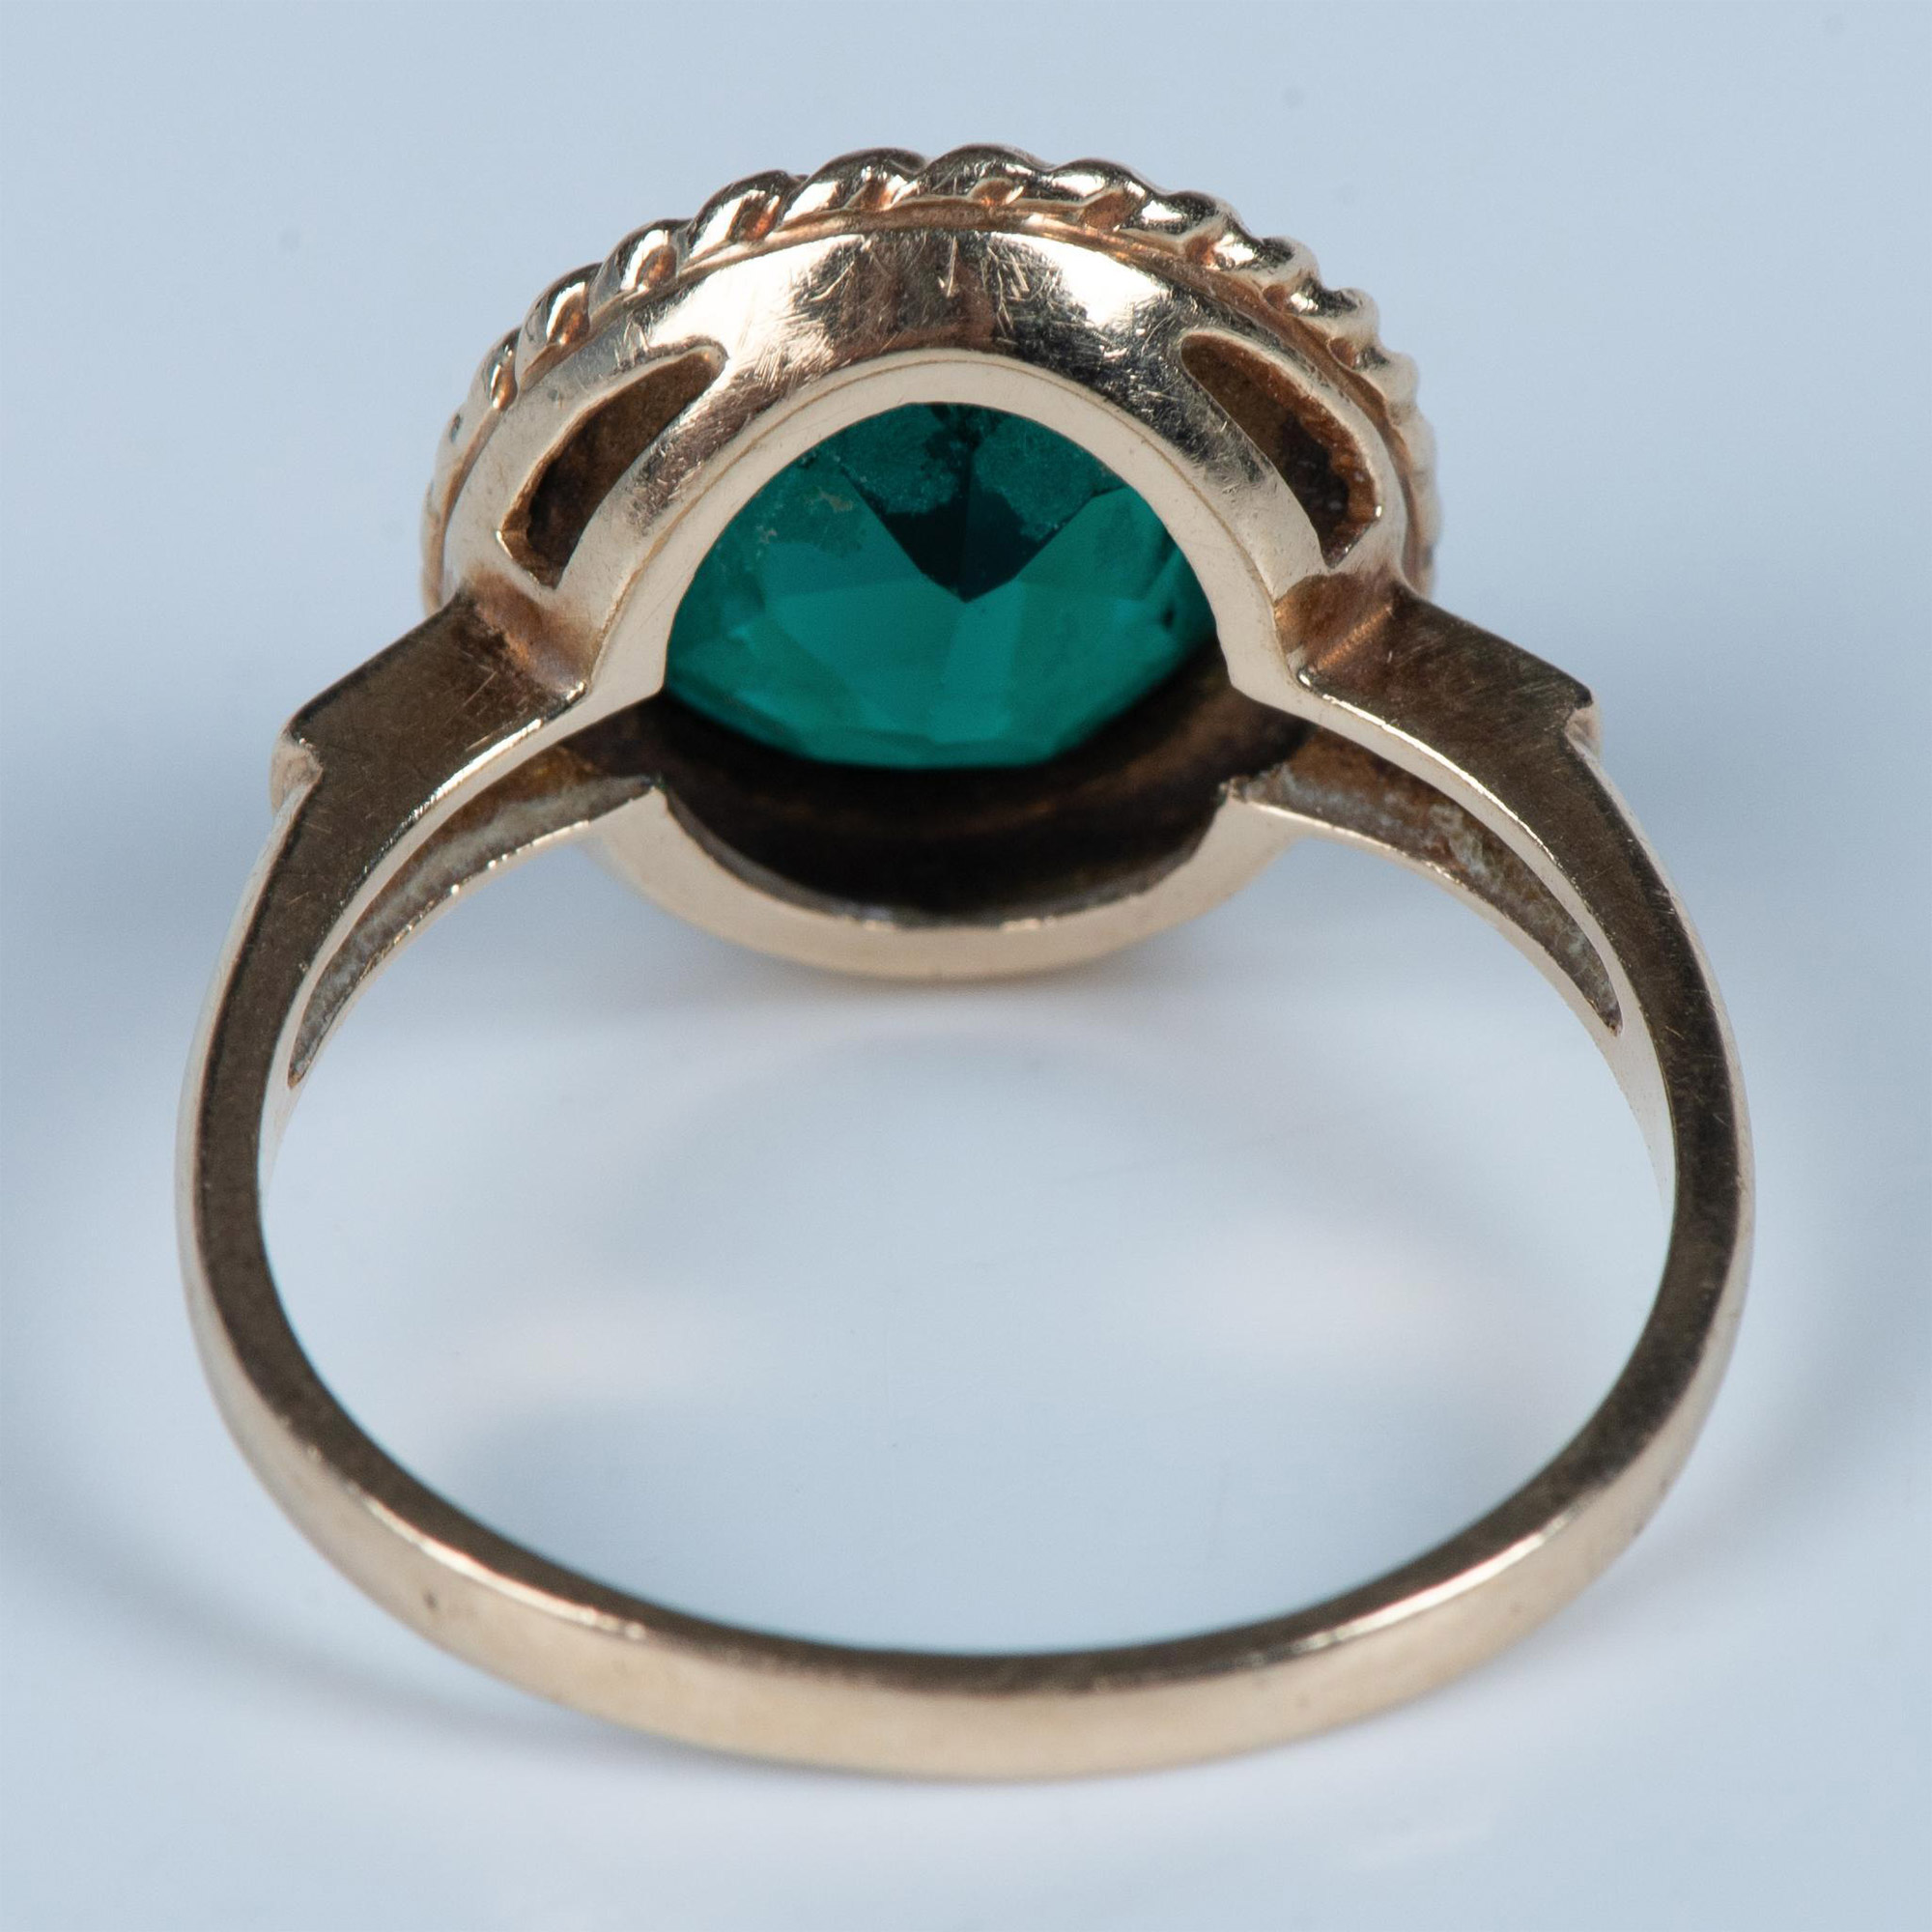 Gold Ring with Large Green Stone - Image 2 of 6